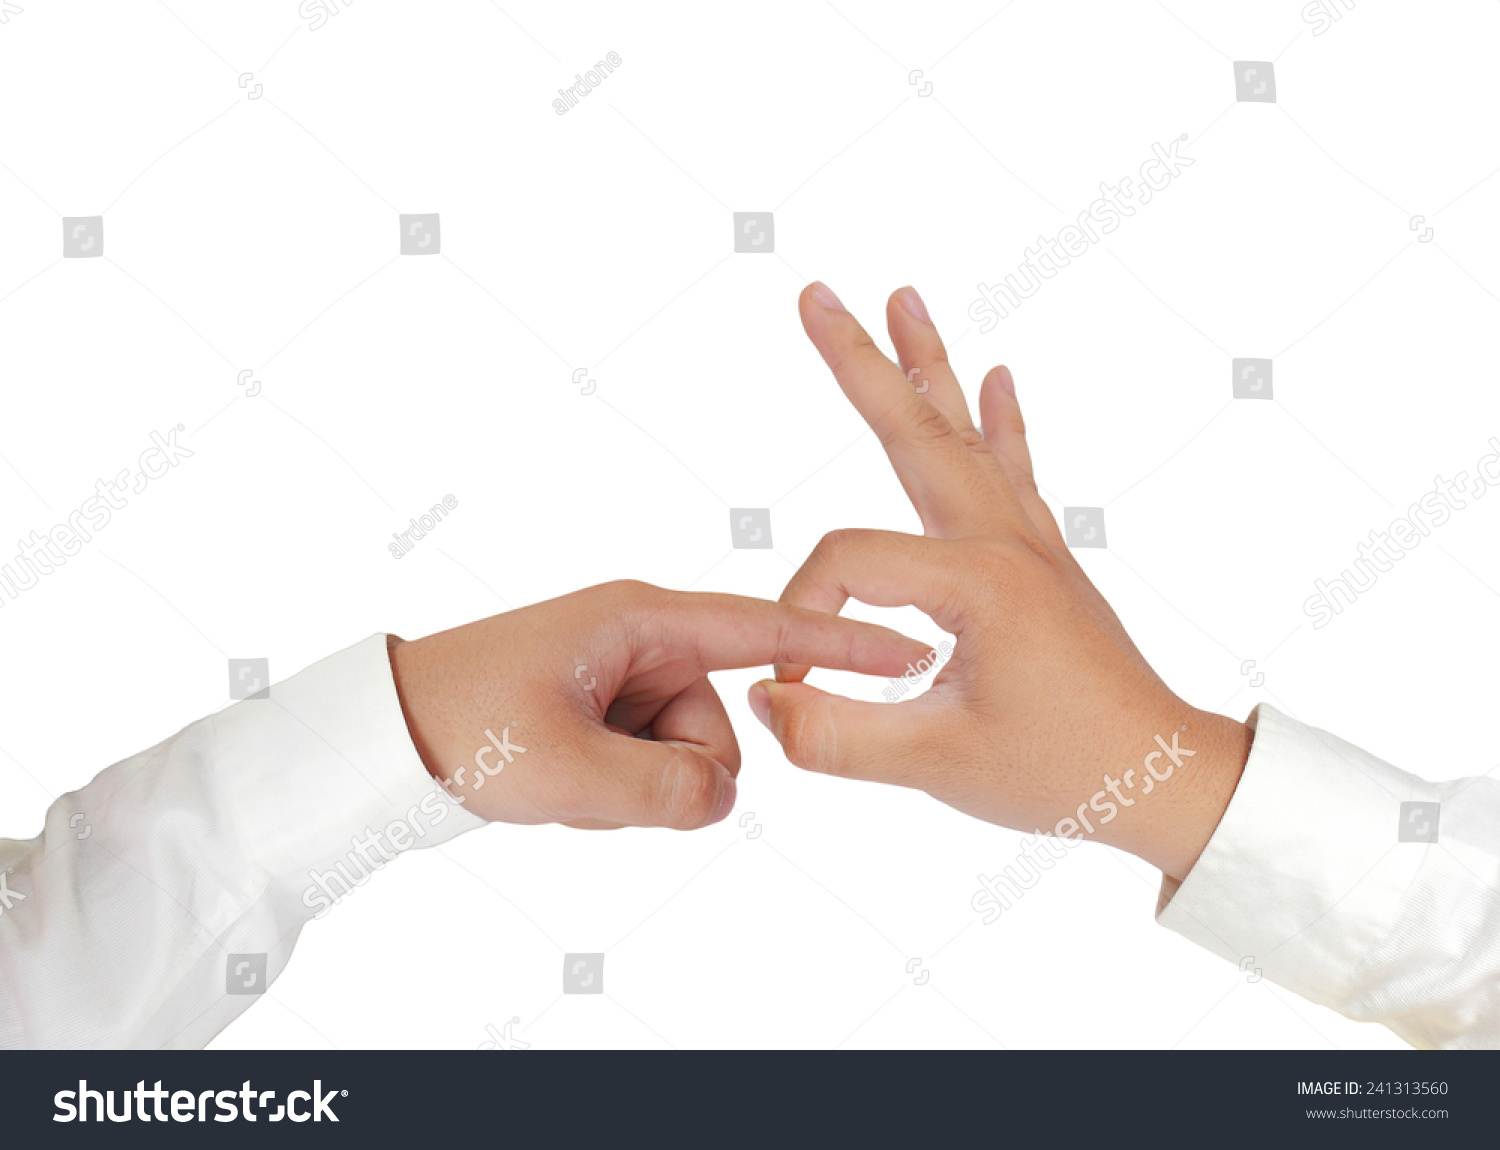 stock-photo-gesture-of-hand-showing-penetrating-sex-with-fingers-in-formal-long-sleeved-shirt-isolated-on-white-241313560.jpg